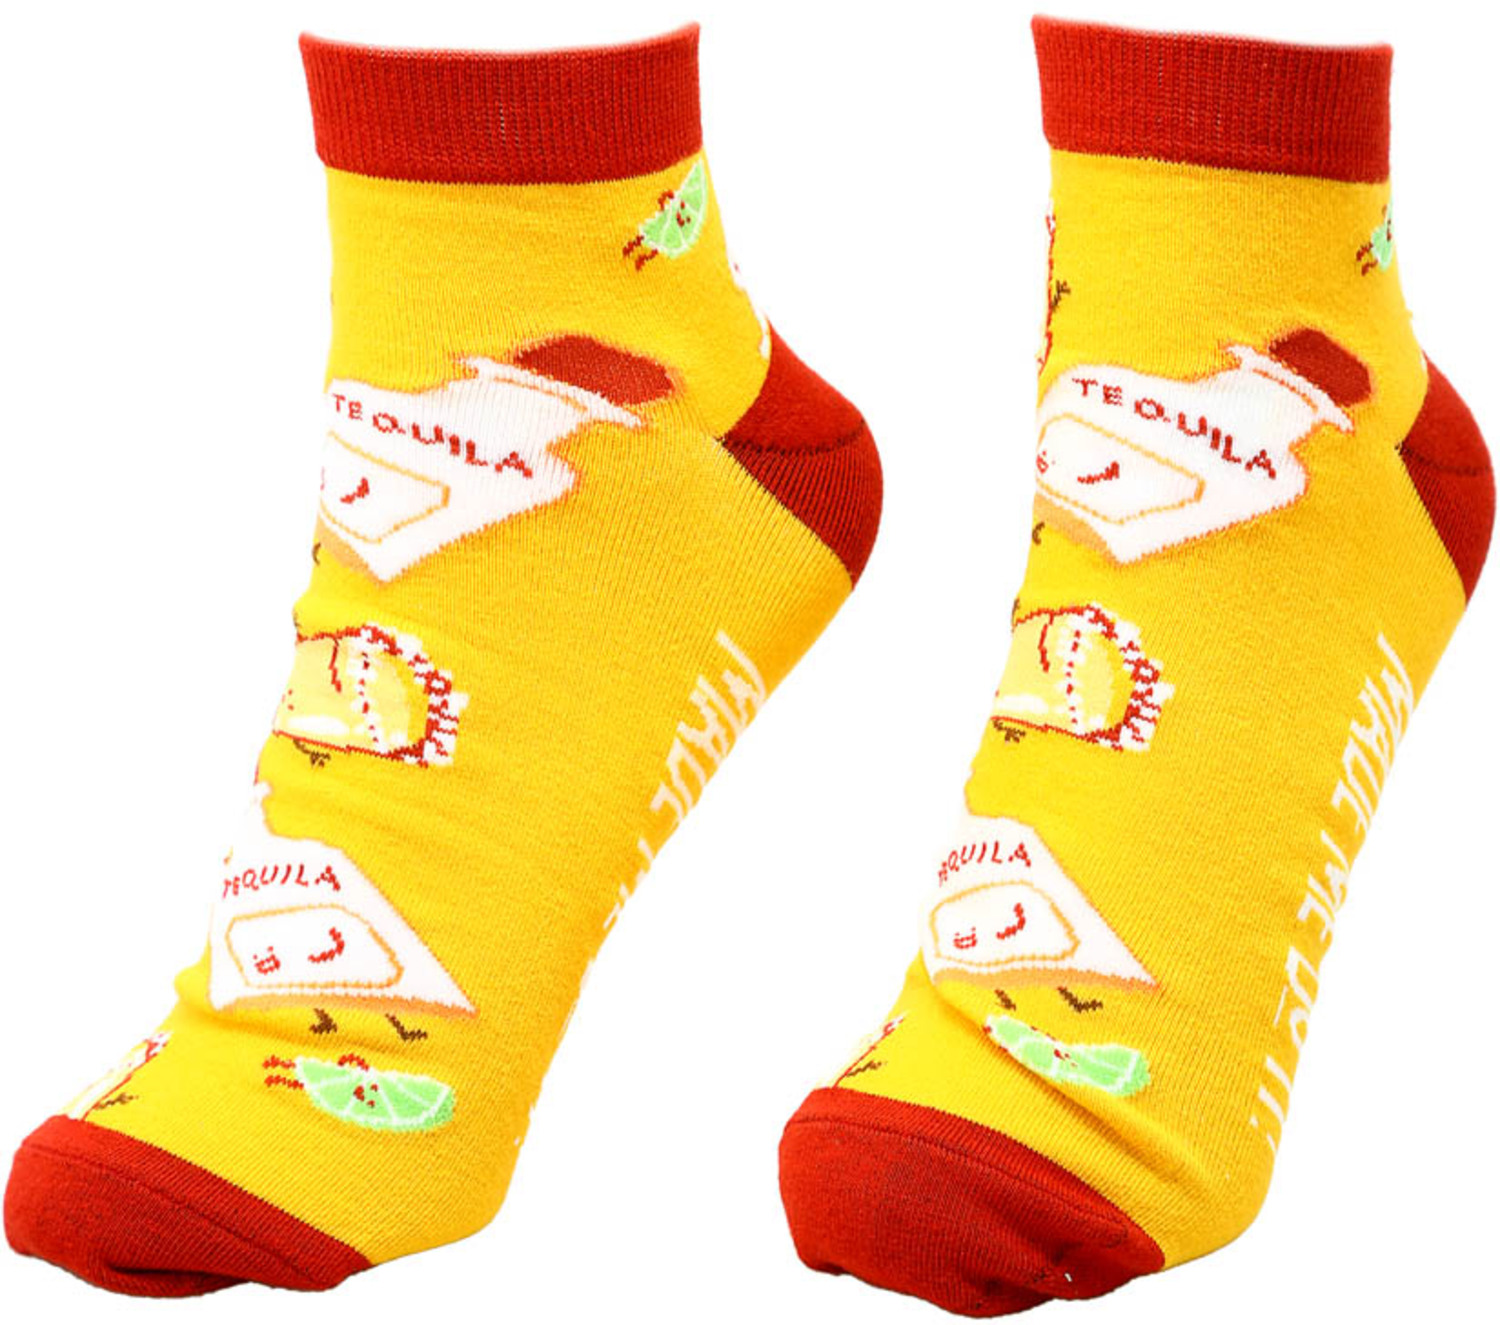 Tequila by Late Night Last Call - Tequila - Cotton Blend Ankle Socks